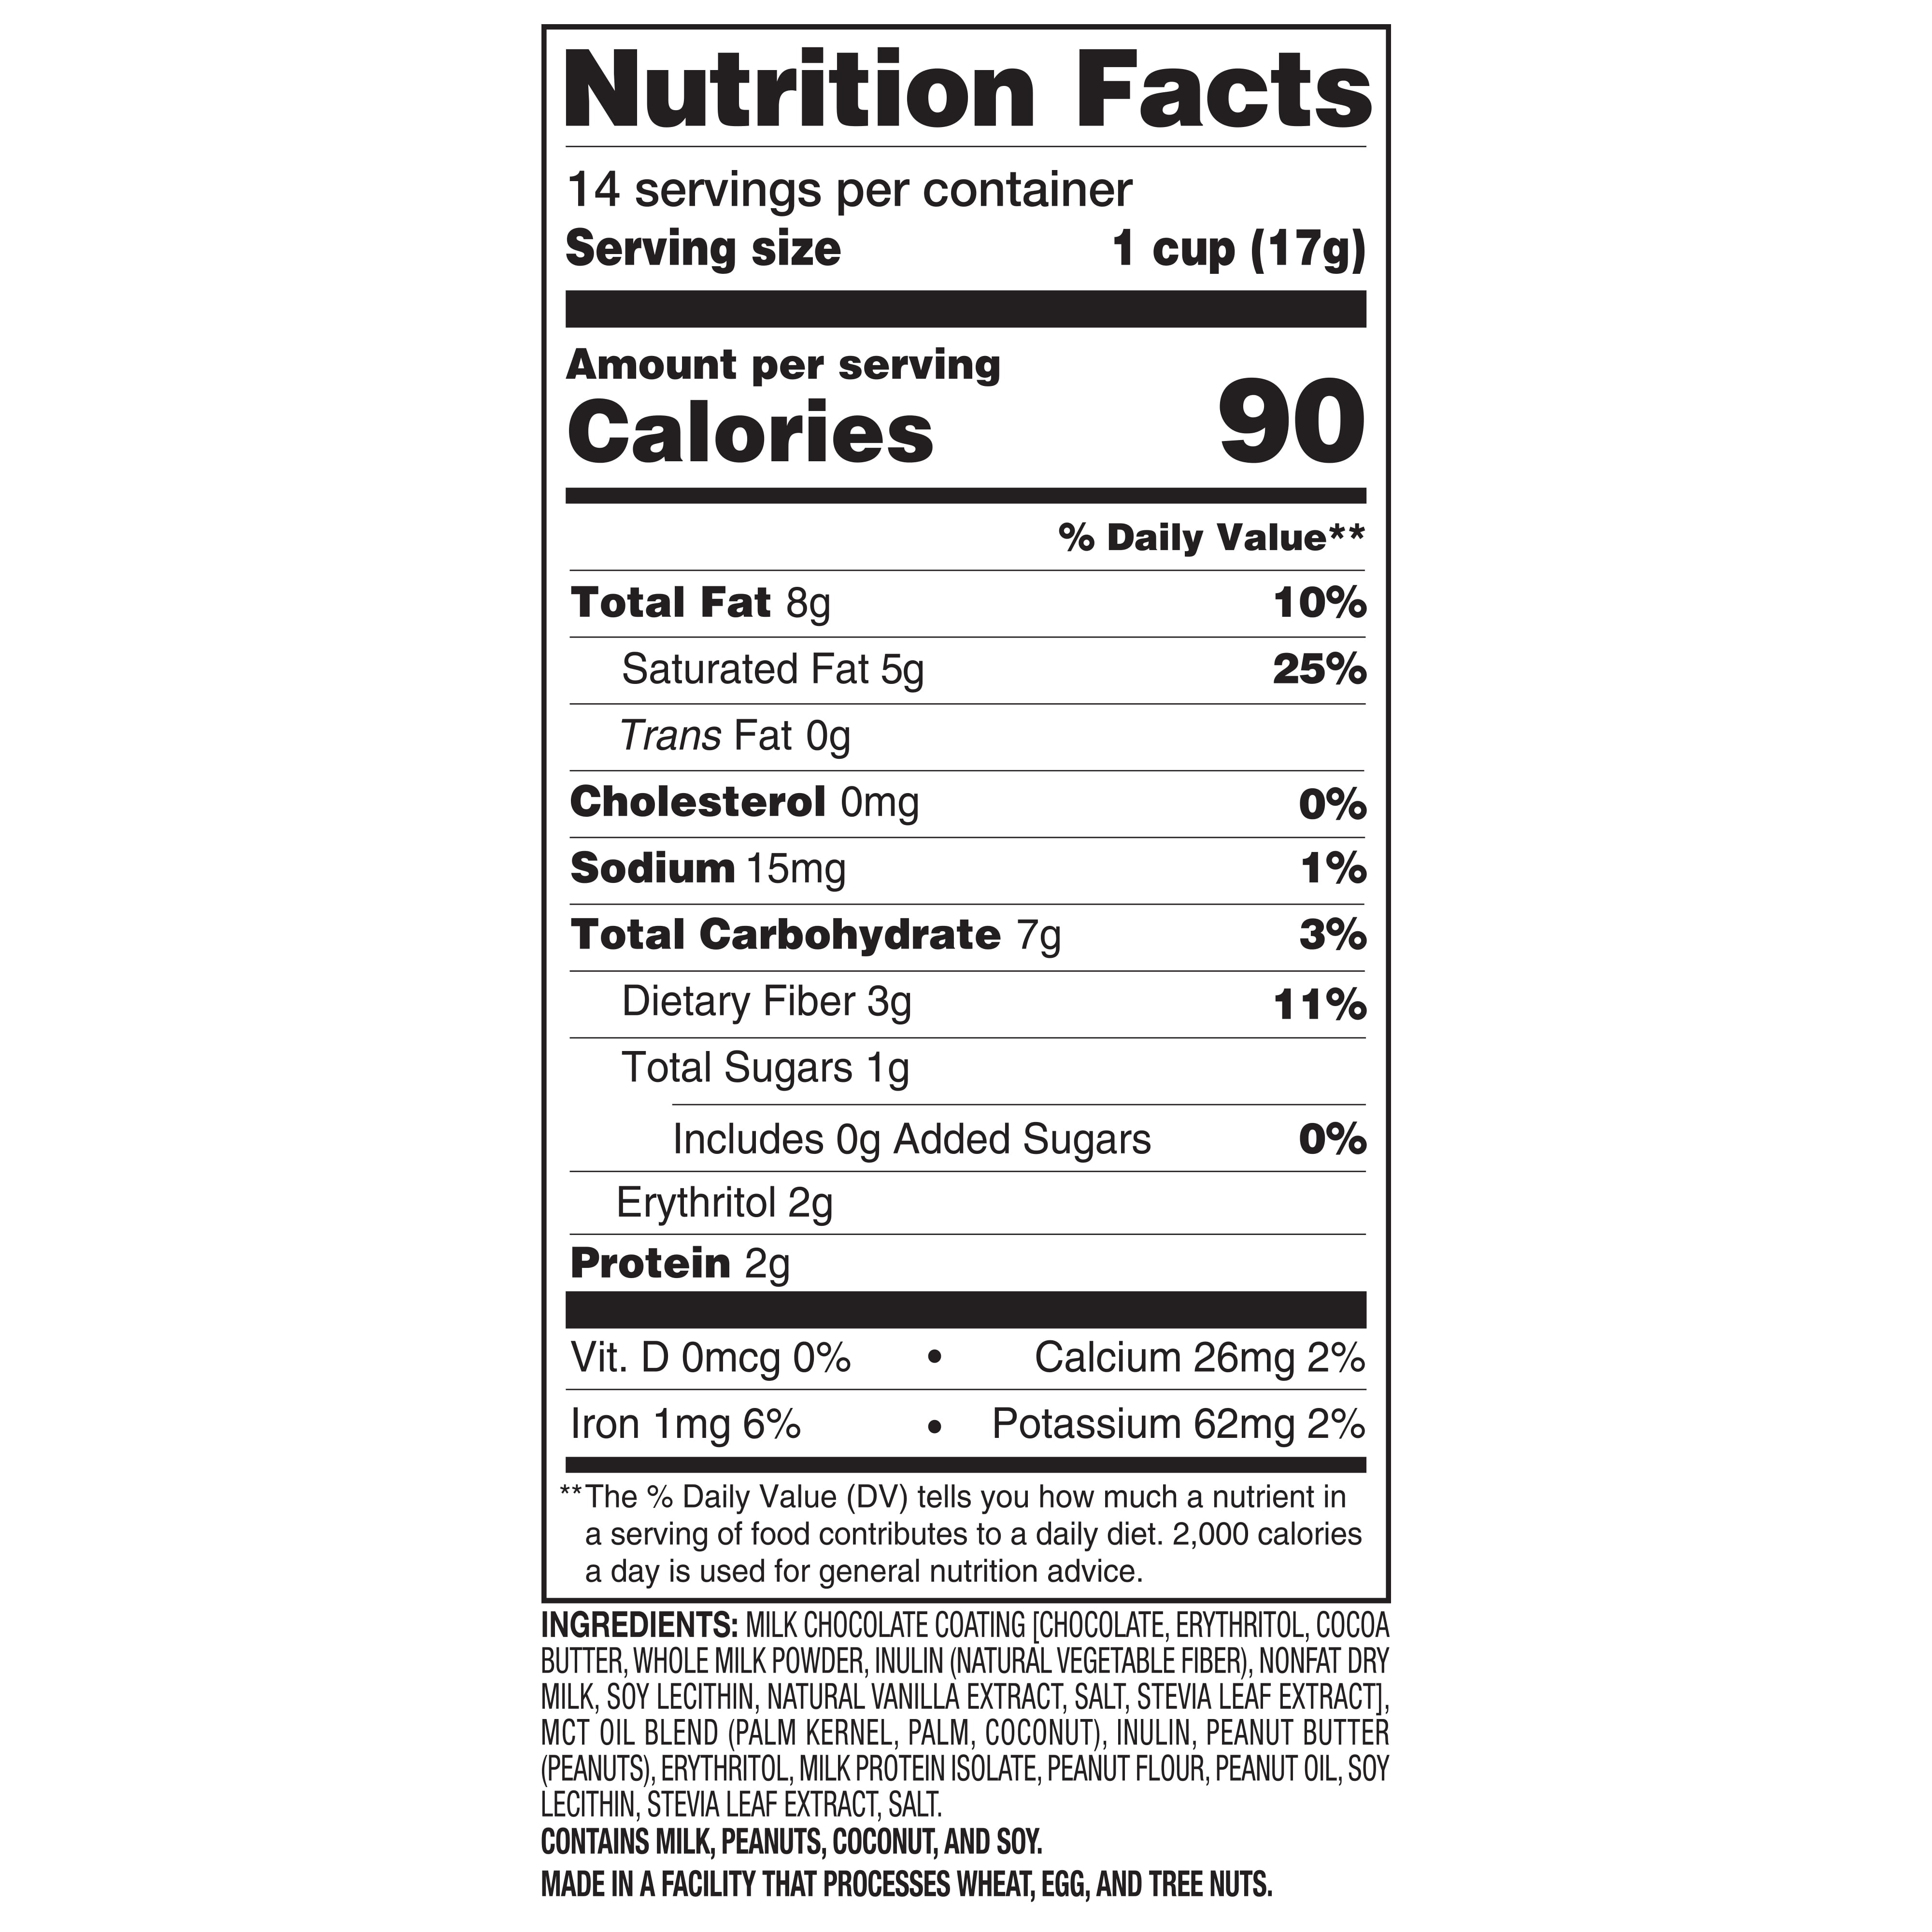 33 Where Are The Macronutrients Located On A Nutritional Label